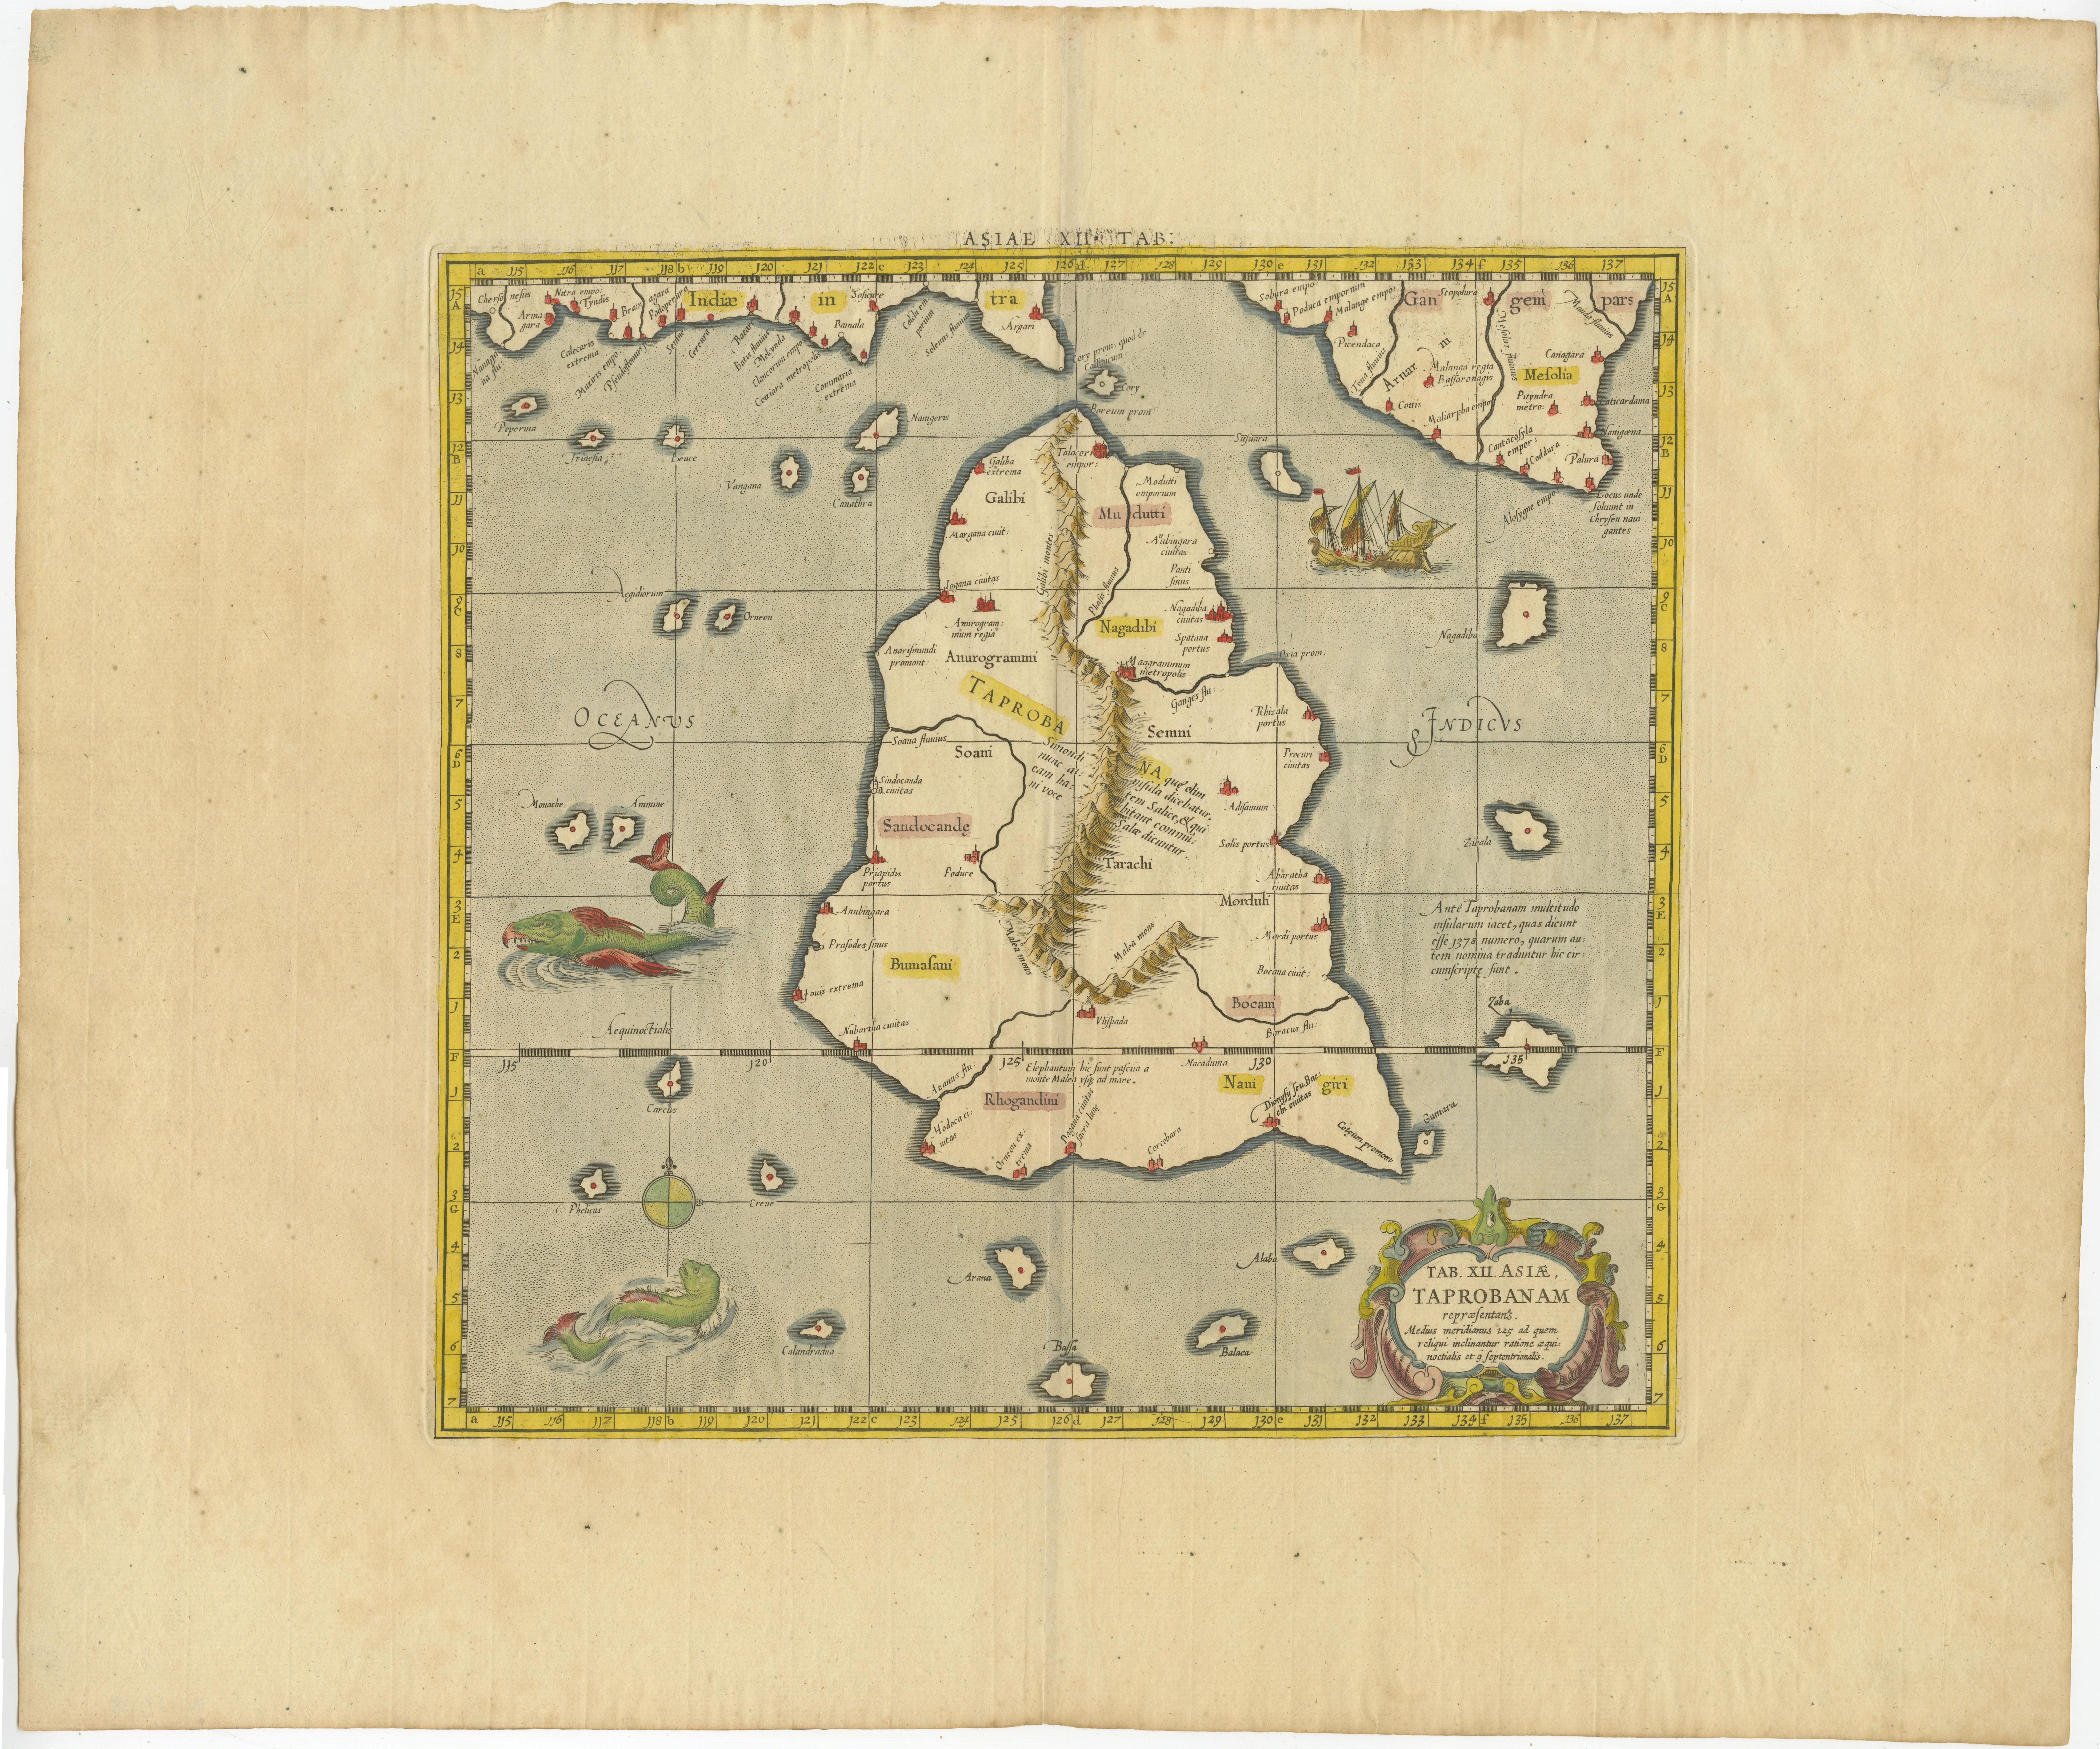 Antique map titled 'Tab XII. Asiae Taprobanam'. Ptolemaic map of Sri Lanka. Ptolemy drew on the accounts of travelers and sailors and though the information was secondhand and often inaccurate it represented the most advanced account of the world's